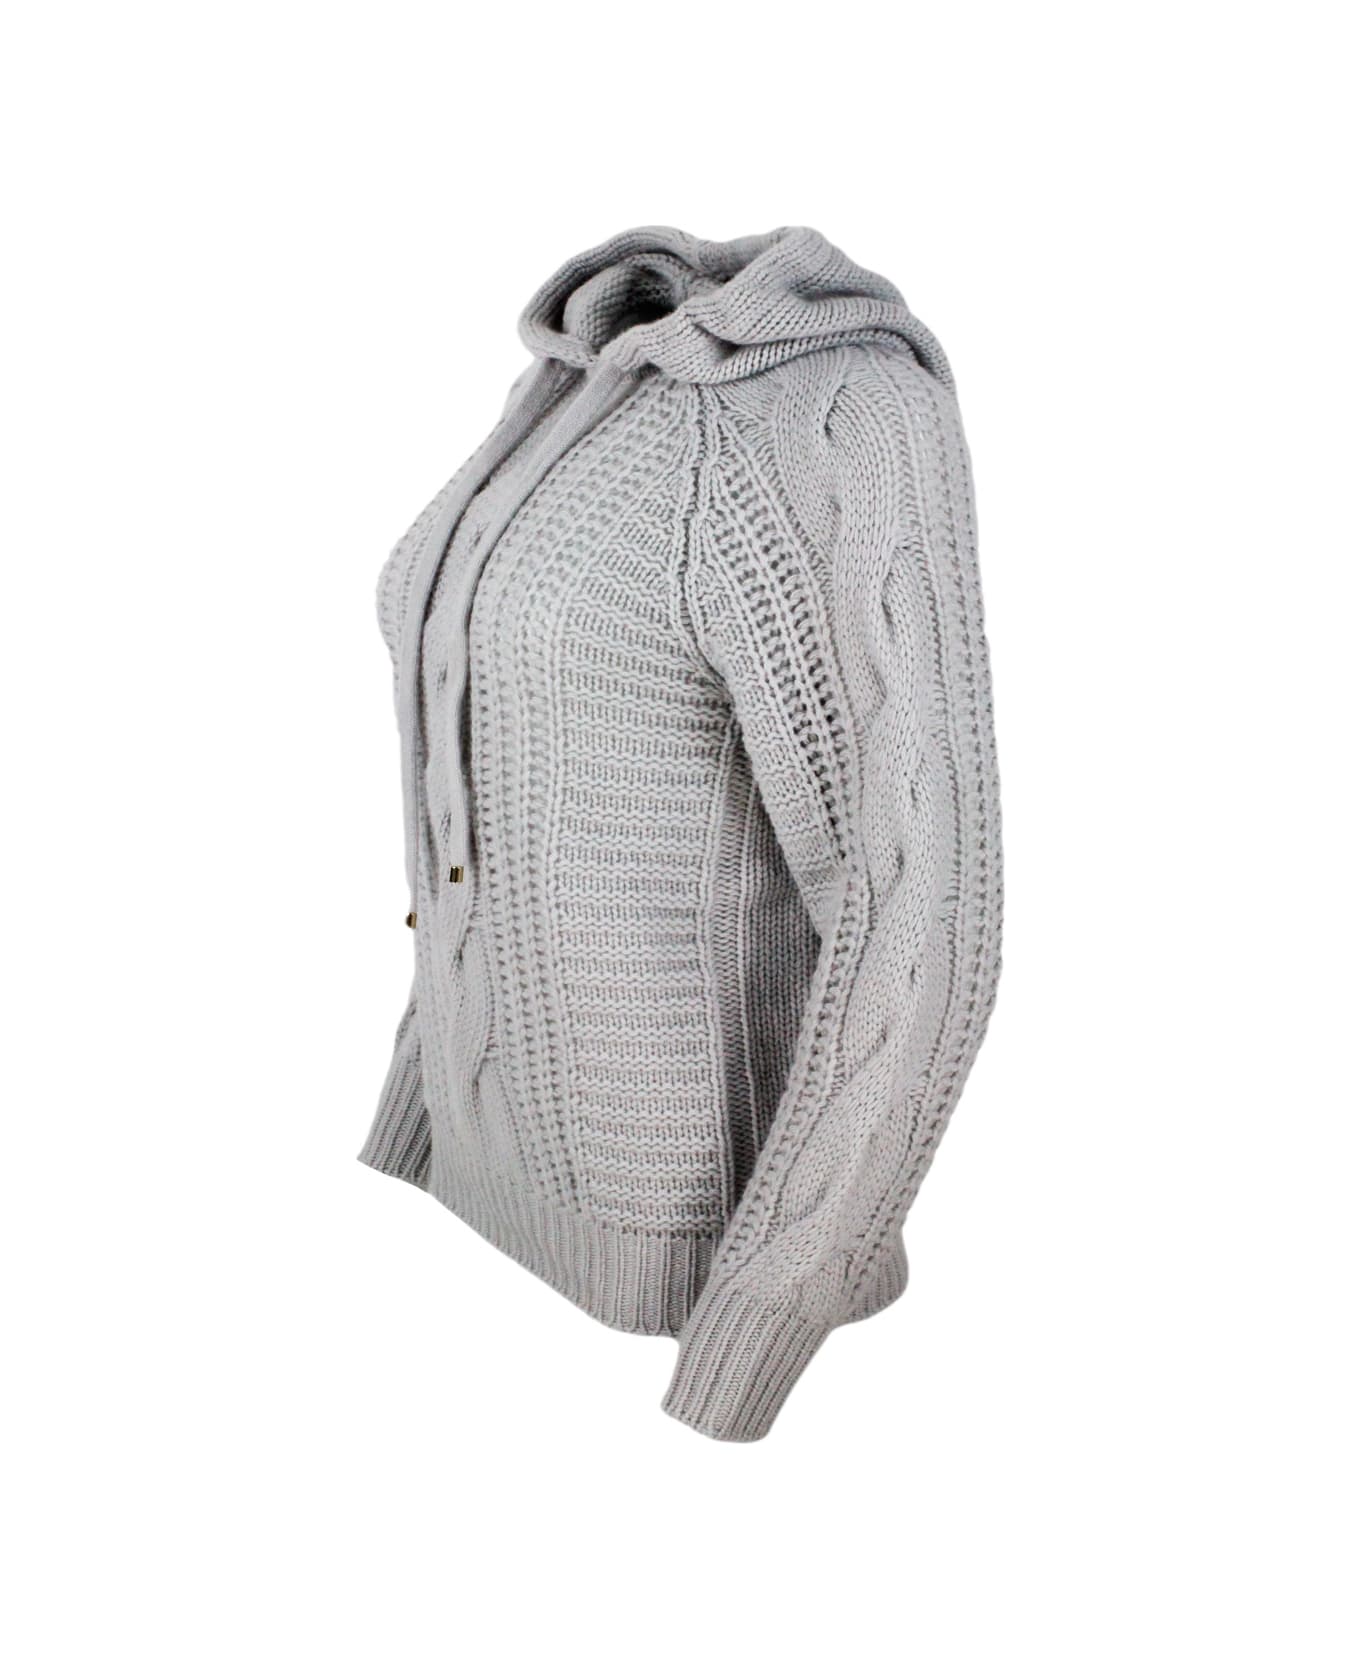 Lorena Antoniazzi Crewneck Sweater With Hood With Drawstring Made Of 100% Cashmere With Cable Knit - Grey